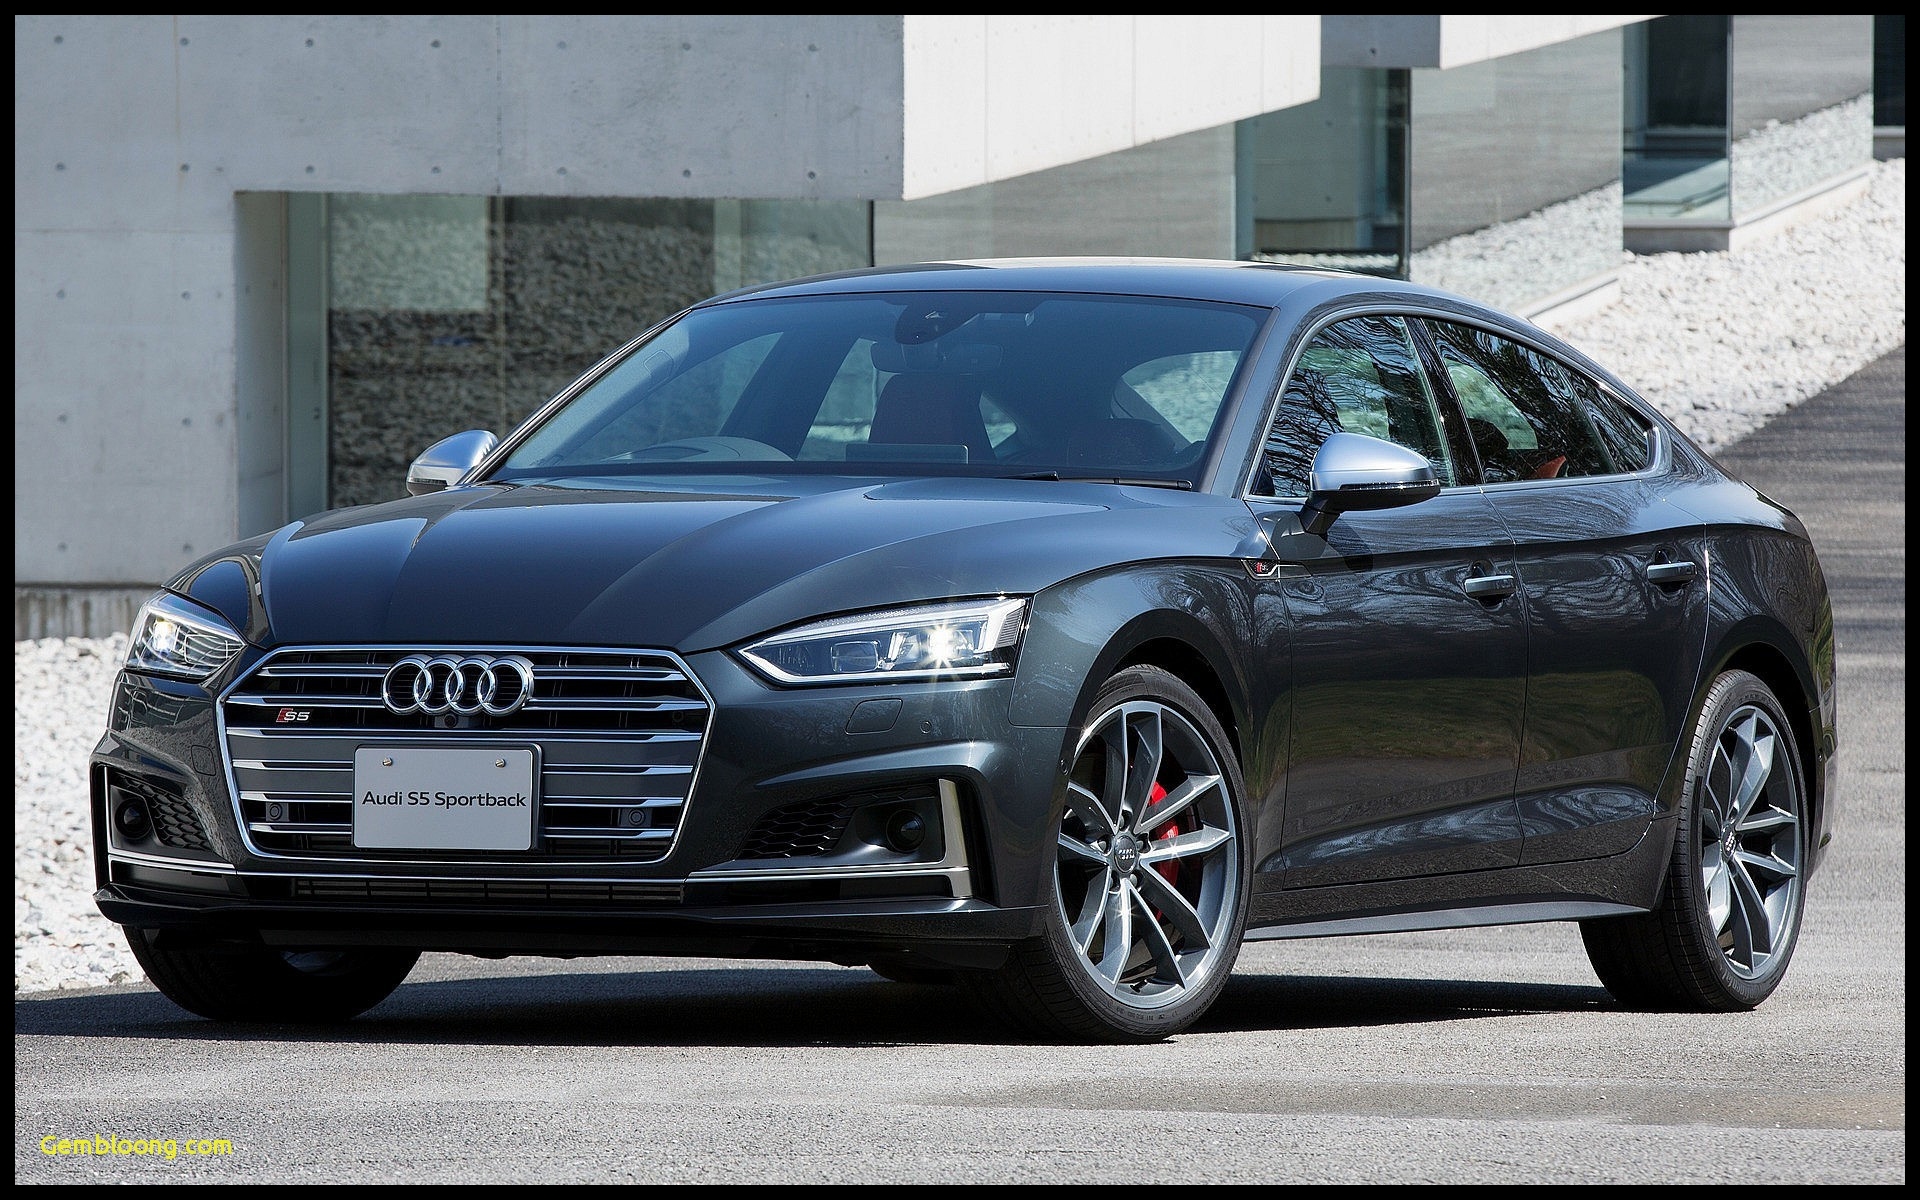 2018 Audi S5 Prices Reviews and 2019 Audi A1 Cars 2018 Audi Tt Neuer